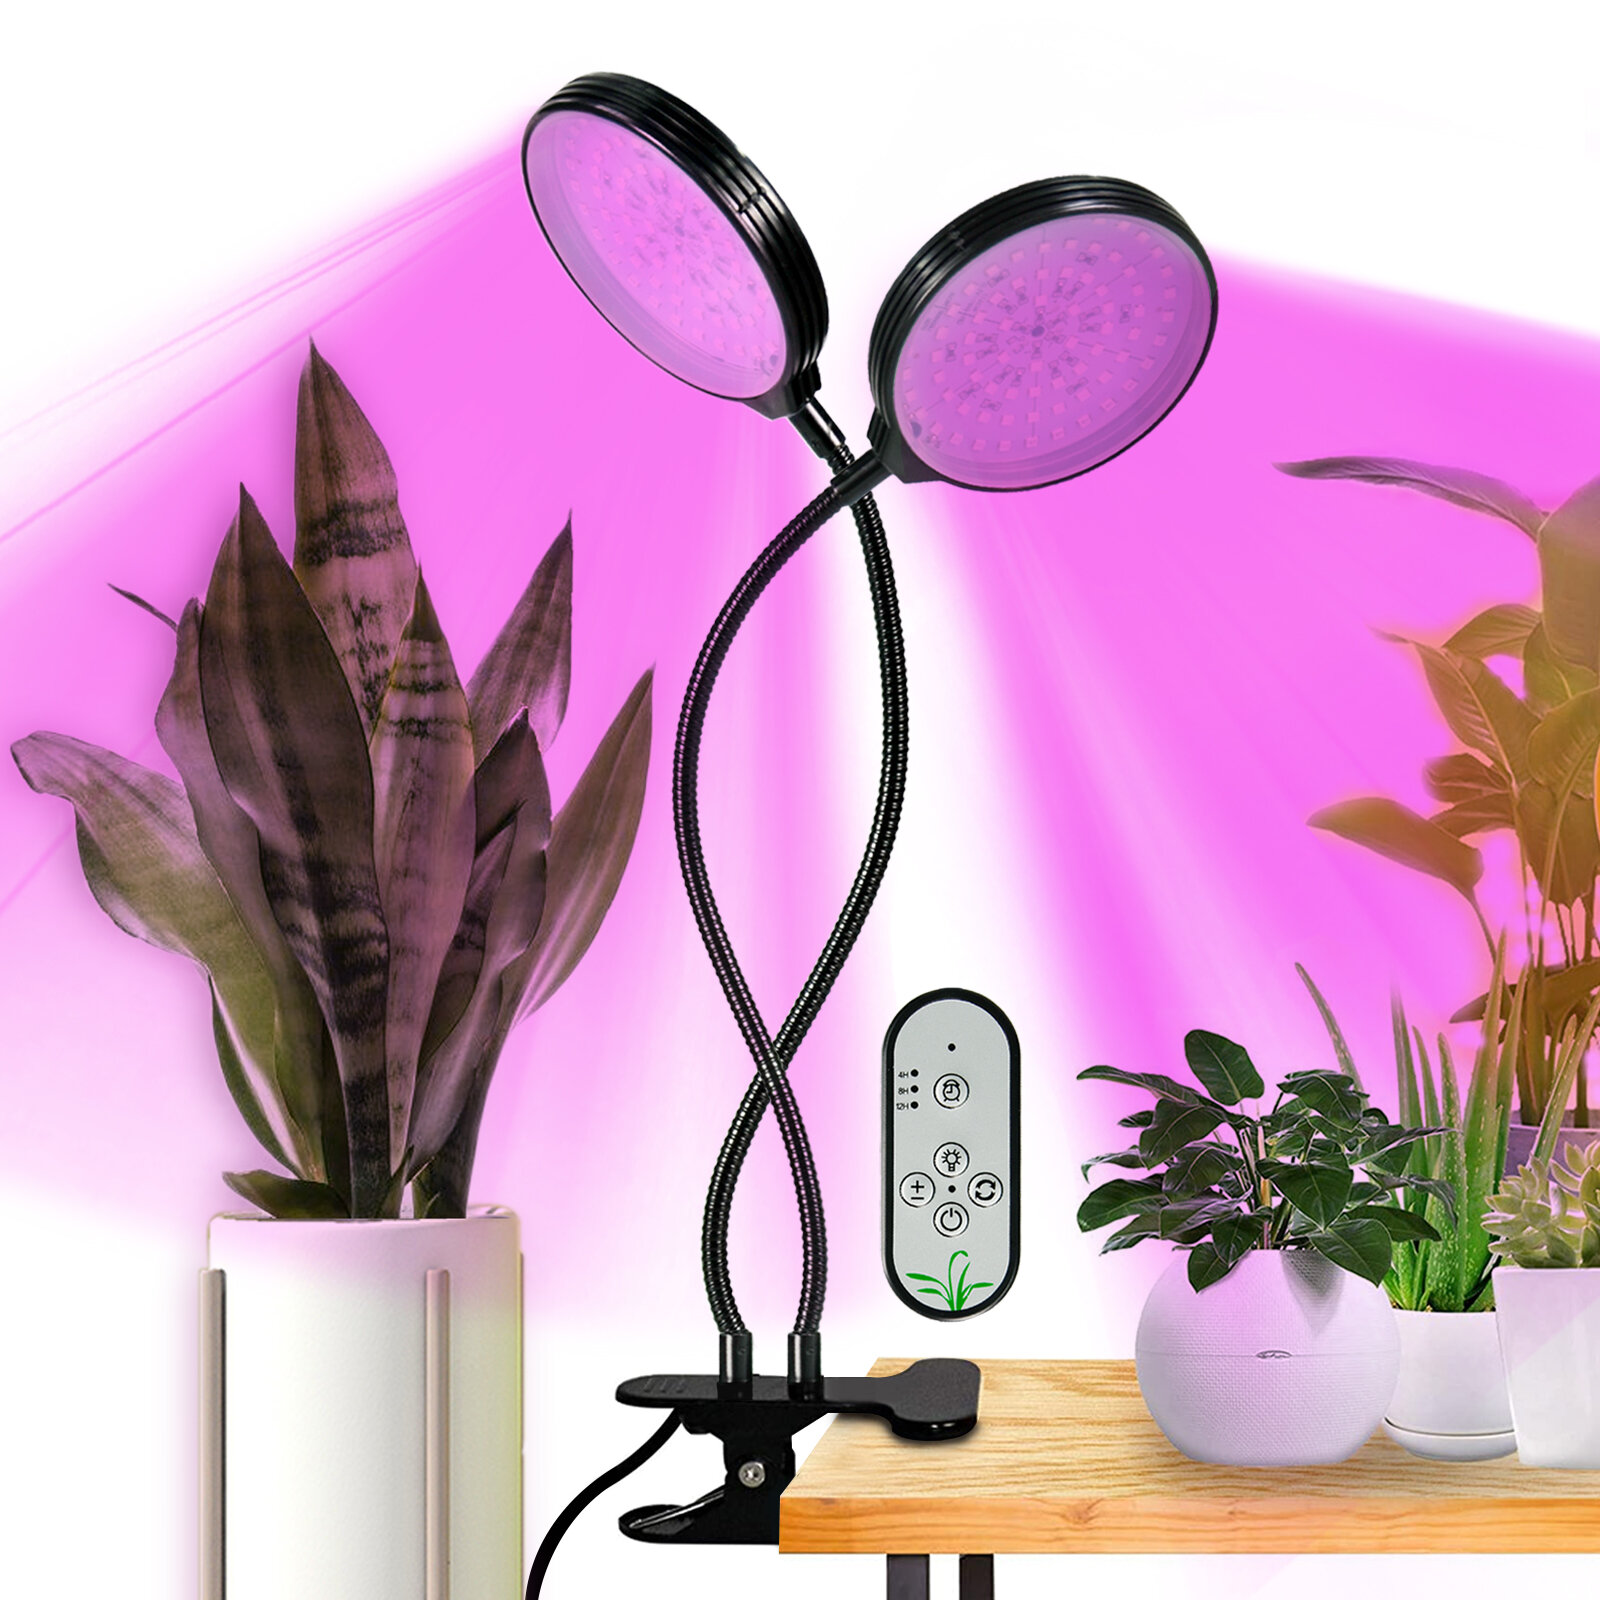 LED Grow Light Plant 3 Head Growing Lamp Lights for Indoor Plants Hydroponics 